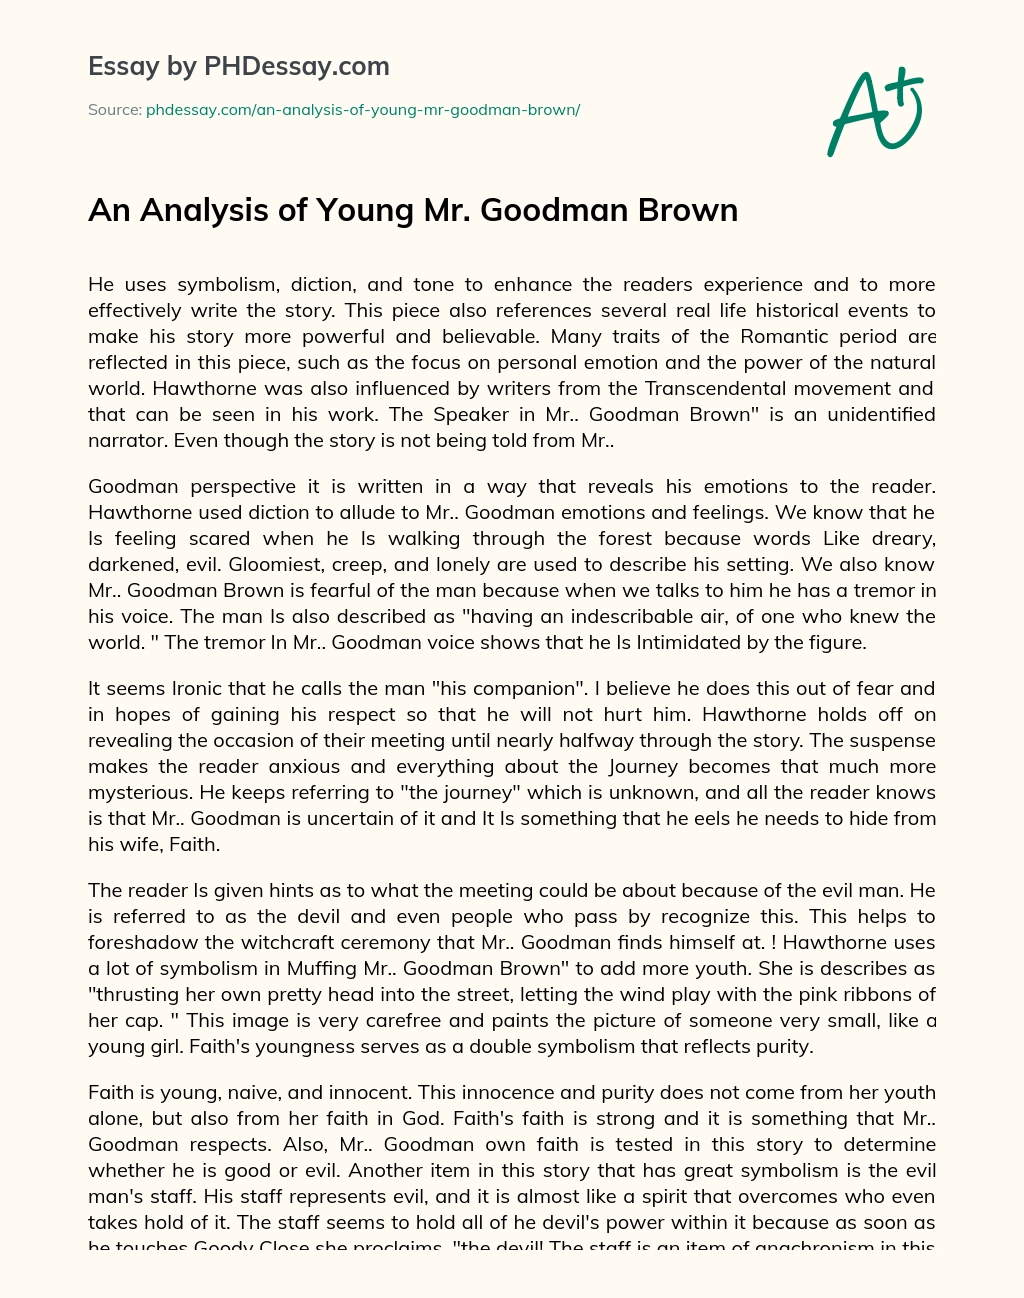 An Analysis of Young Mr. Goodman Brown essay